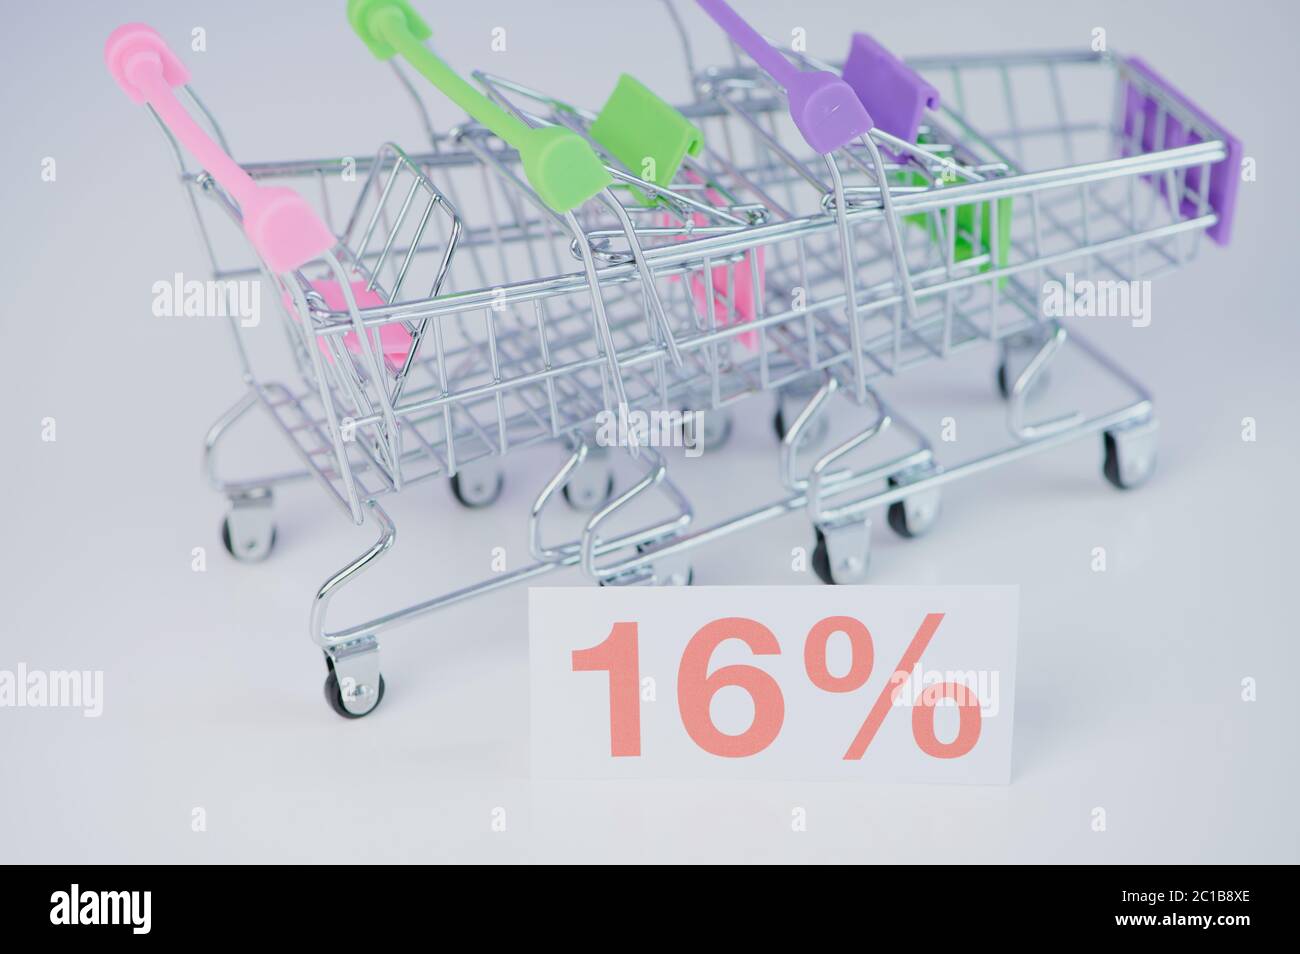 16 % sign in front of three miniature shopping carts as symbol for the new VAT in Germany on 01.07.20 Stock Photo